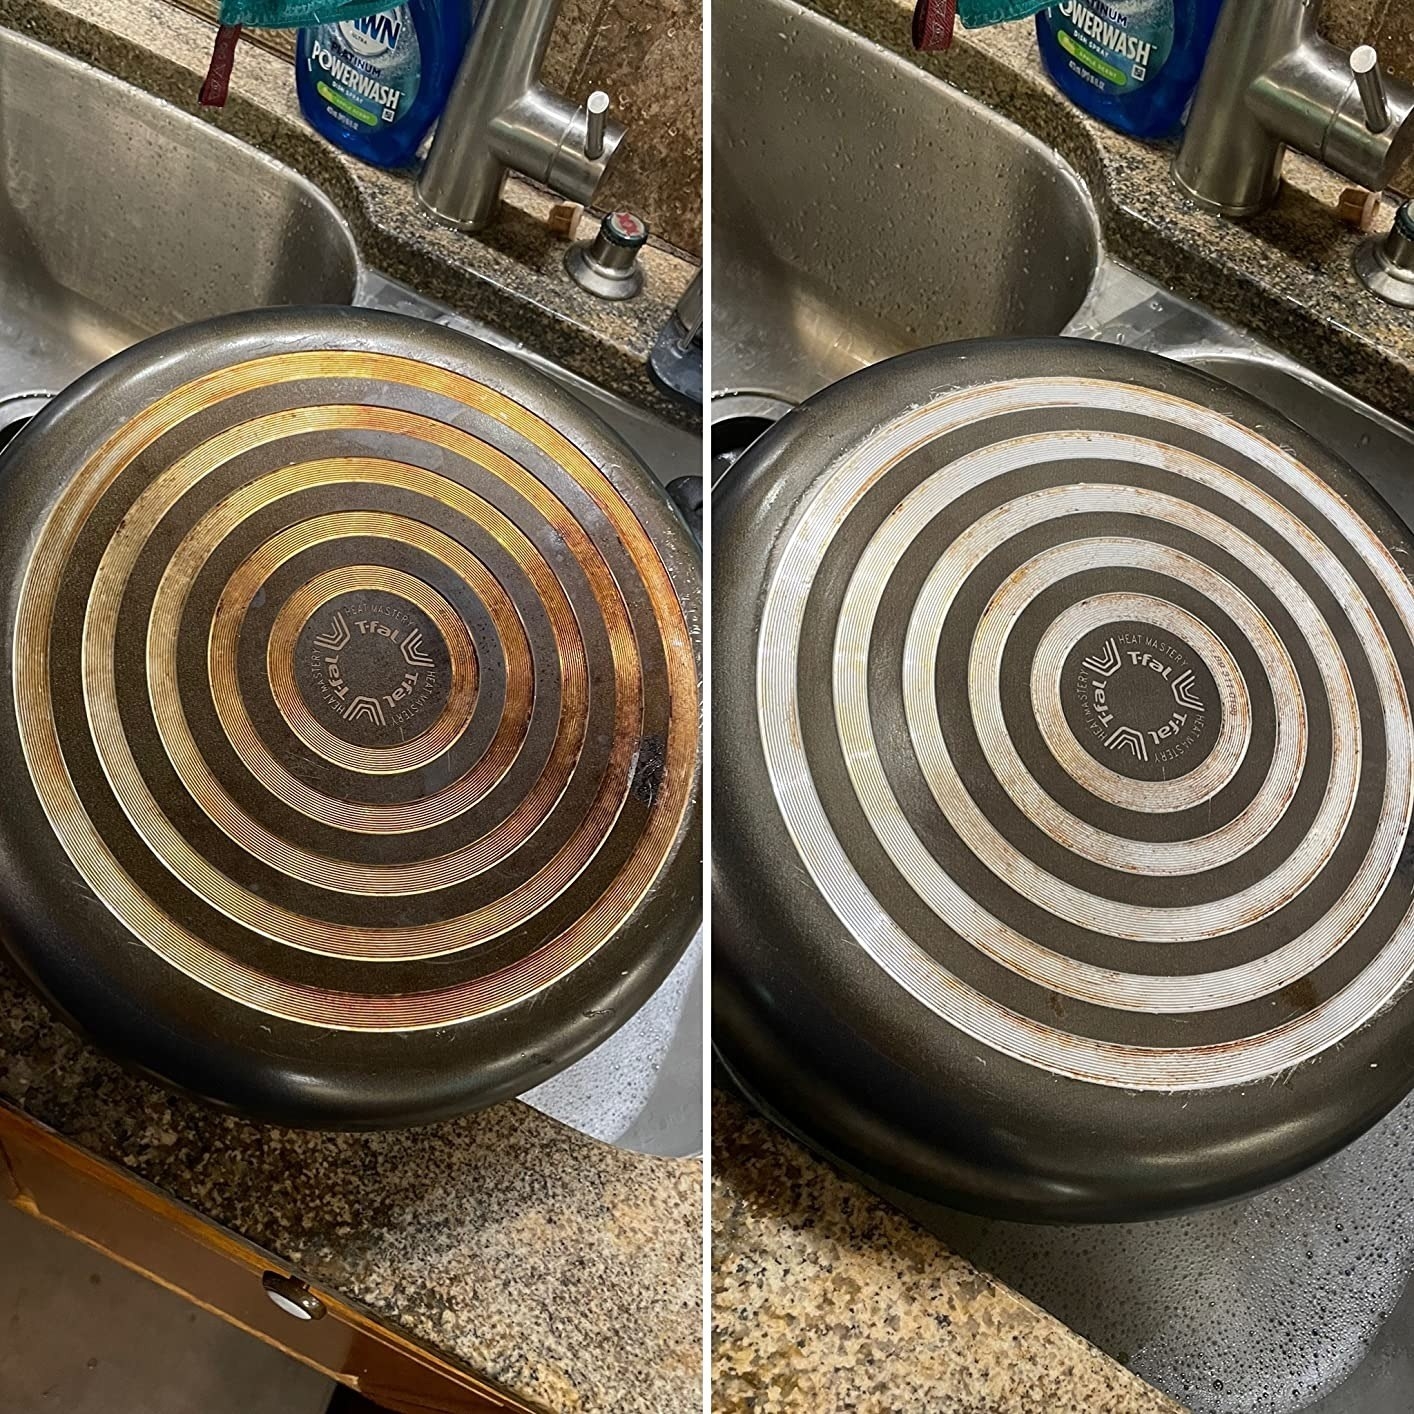 on left: rusty bottom of a T-fal pot. on right, same T-fal pot with more silver-looking bottom after using The Pink Stuff